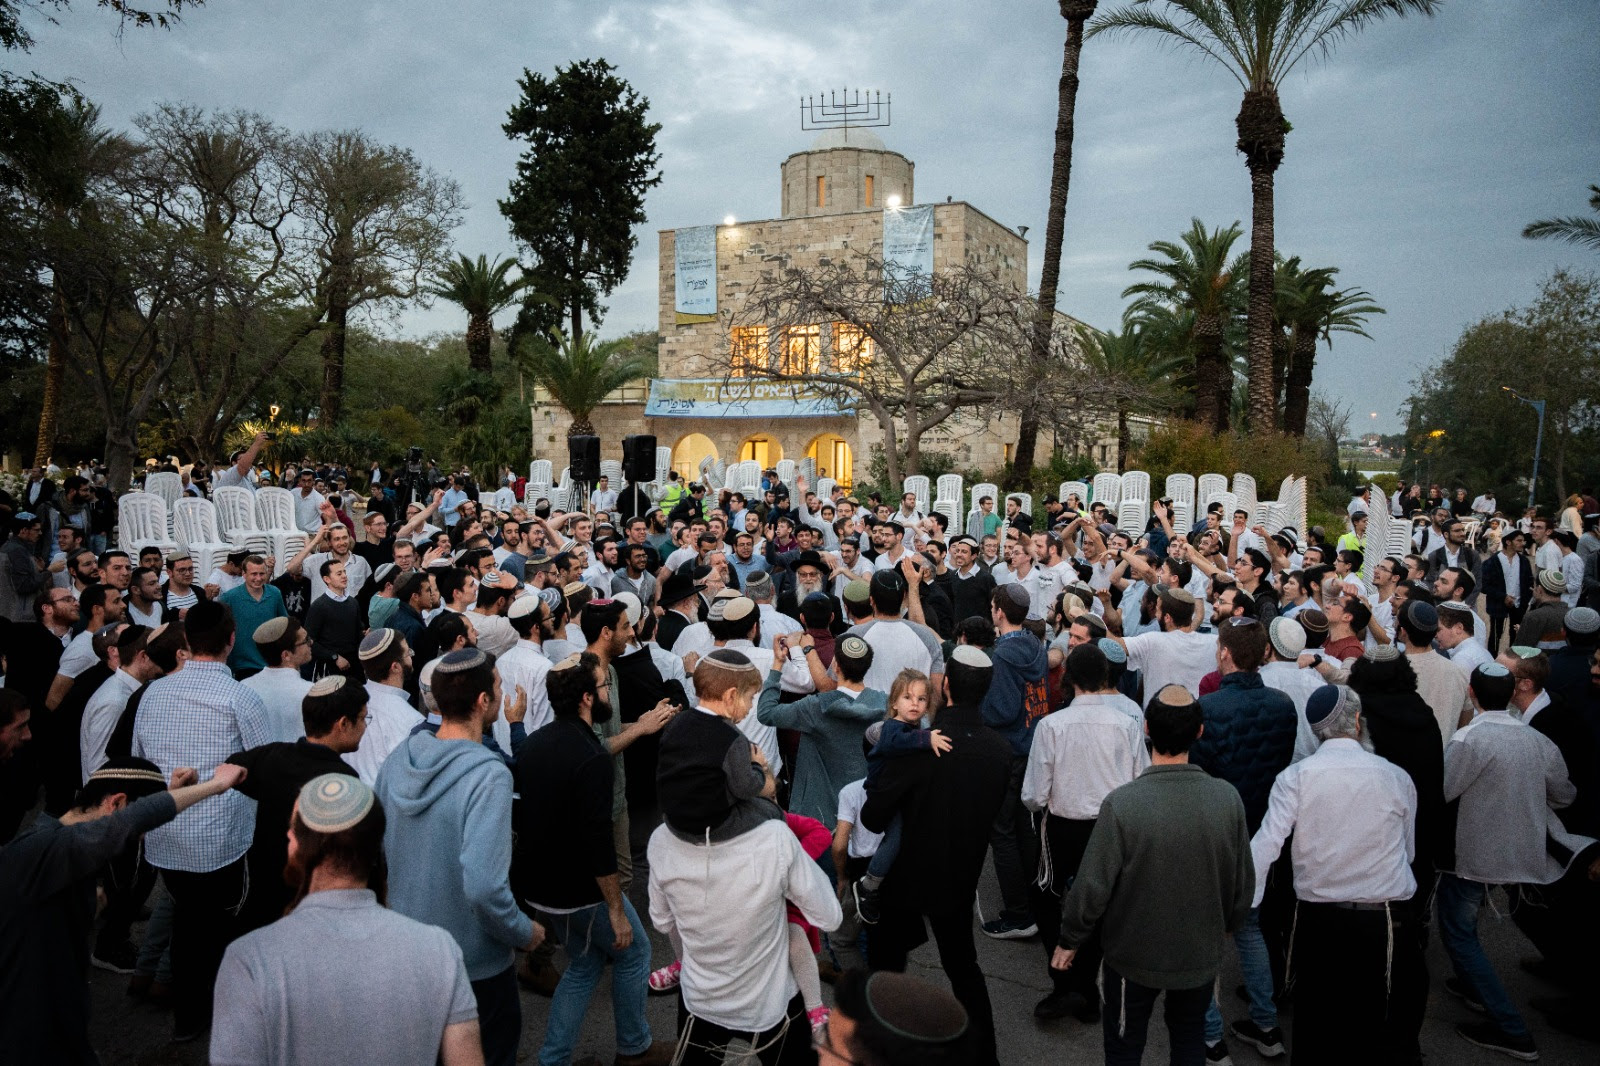 2,500 talmidim from yeshivot across the country gathered in Kerem B'Yavne for a day of Torah learning. Over 40 shiurim were given about various aspects of Shabbat. The event culminated with a final gathering, where everyone gathered to hear from the leadi